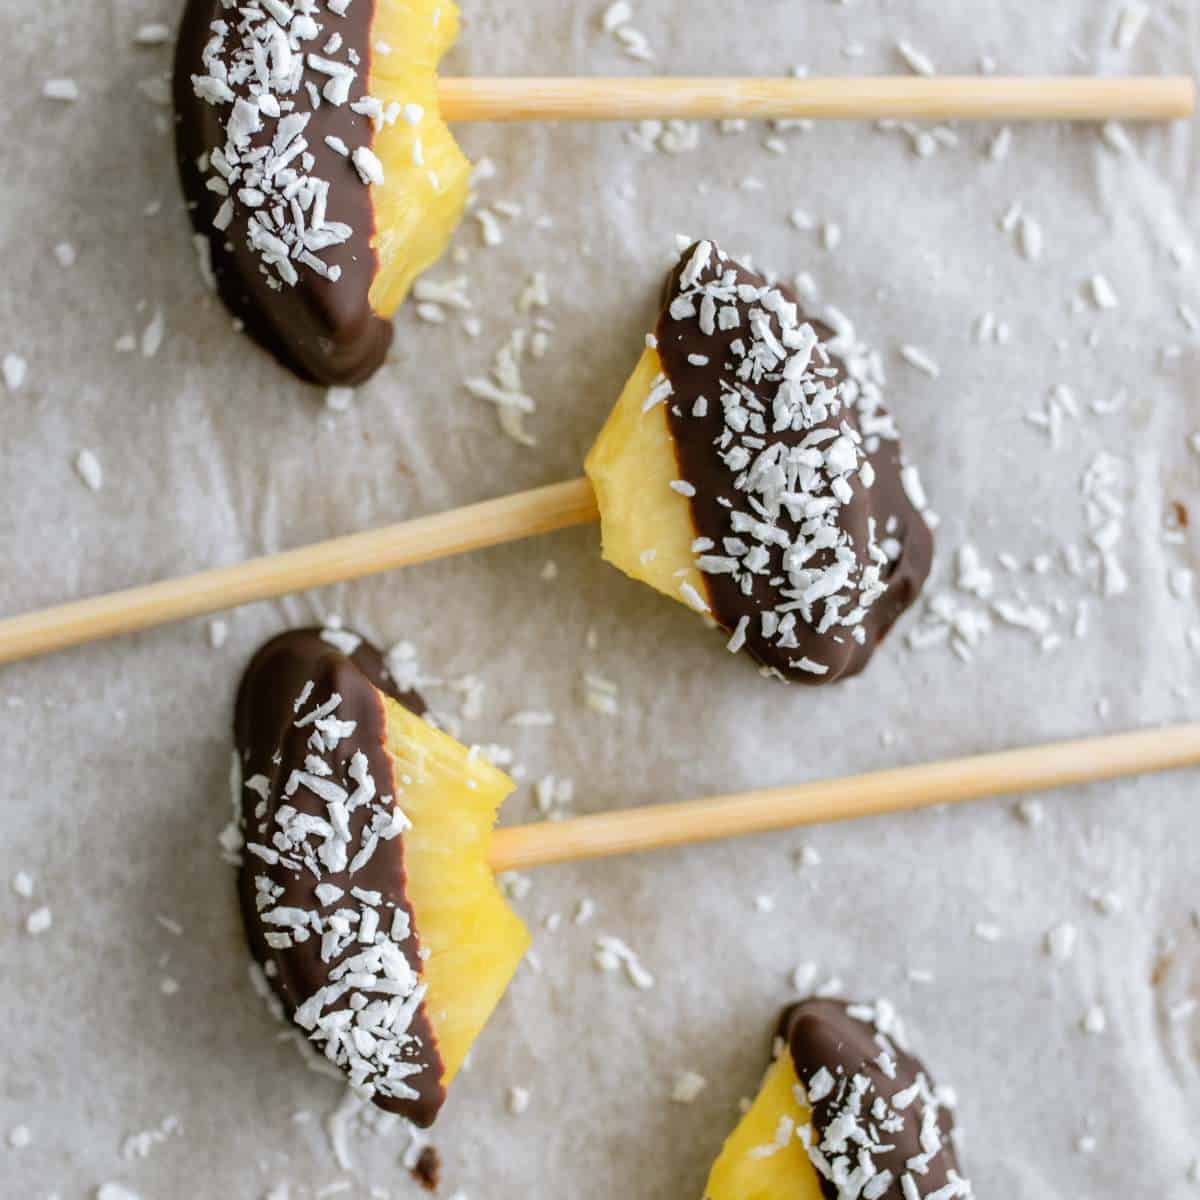 Chocolate-covered pineapples on a baking sheet with shredded coconut laying around them.